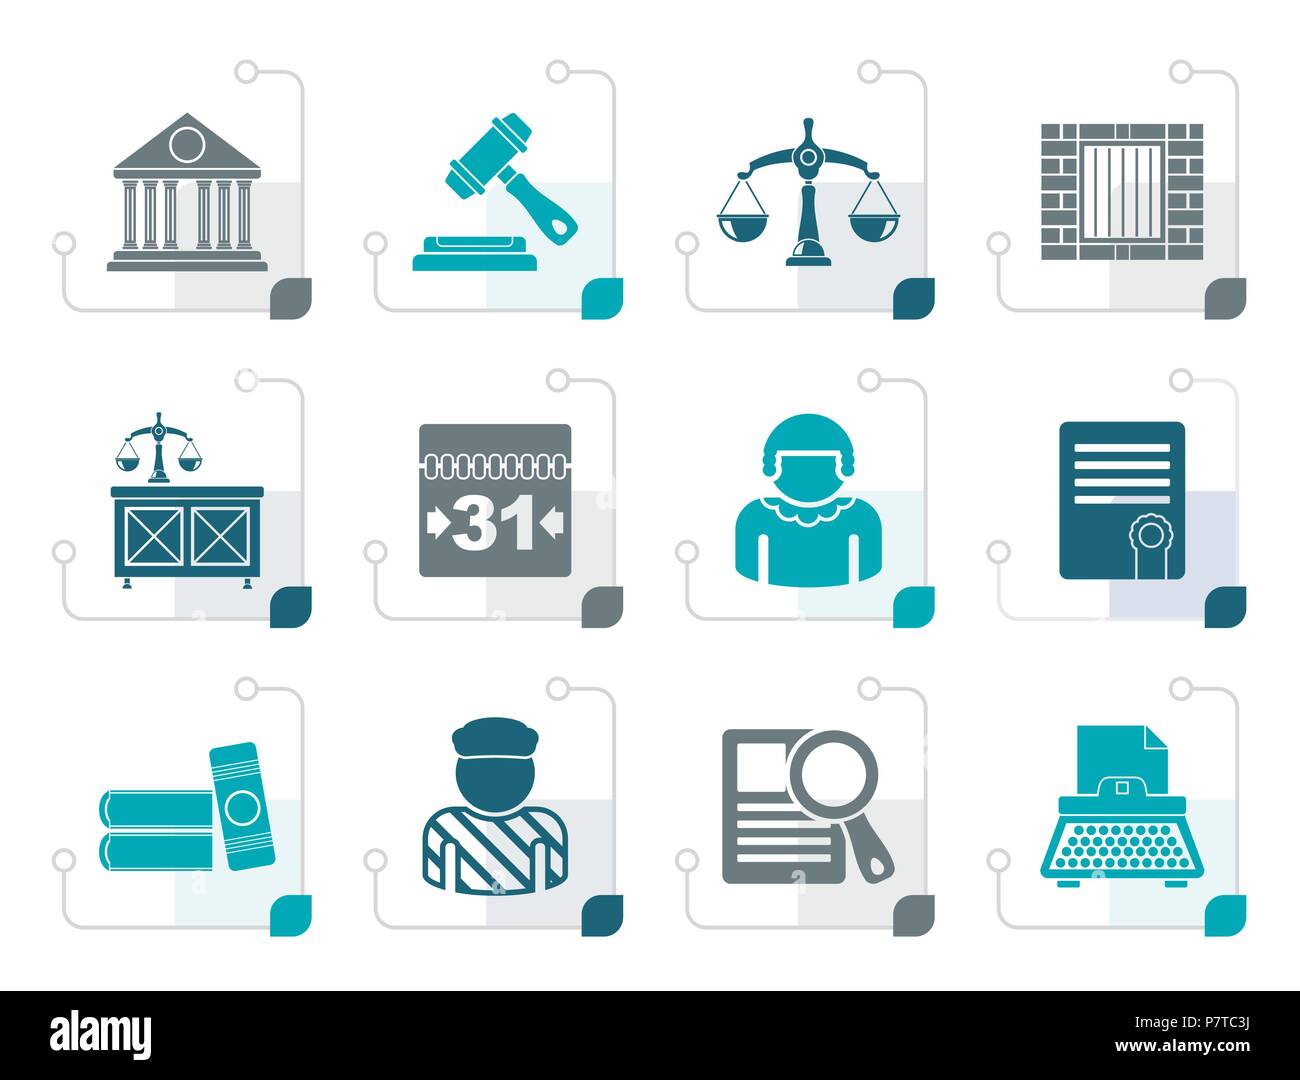 Stylized Justice and Judicial System icons - vector icon set Stock Vector